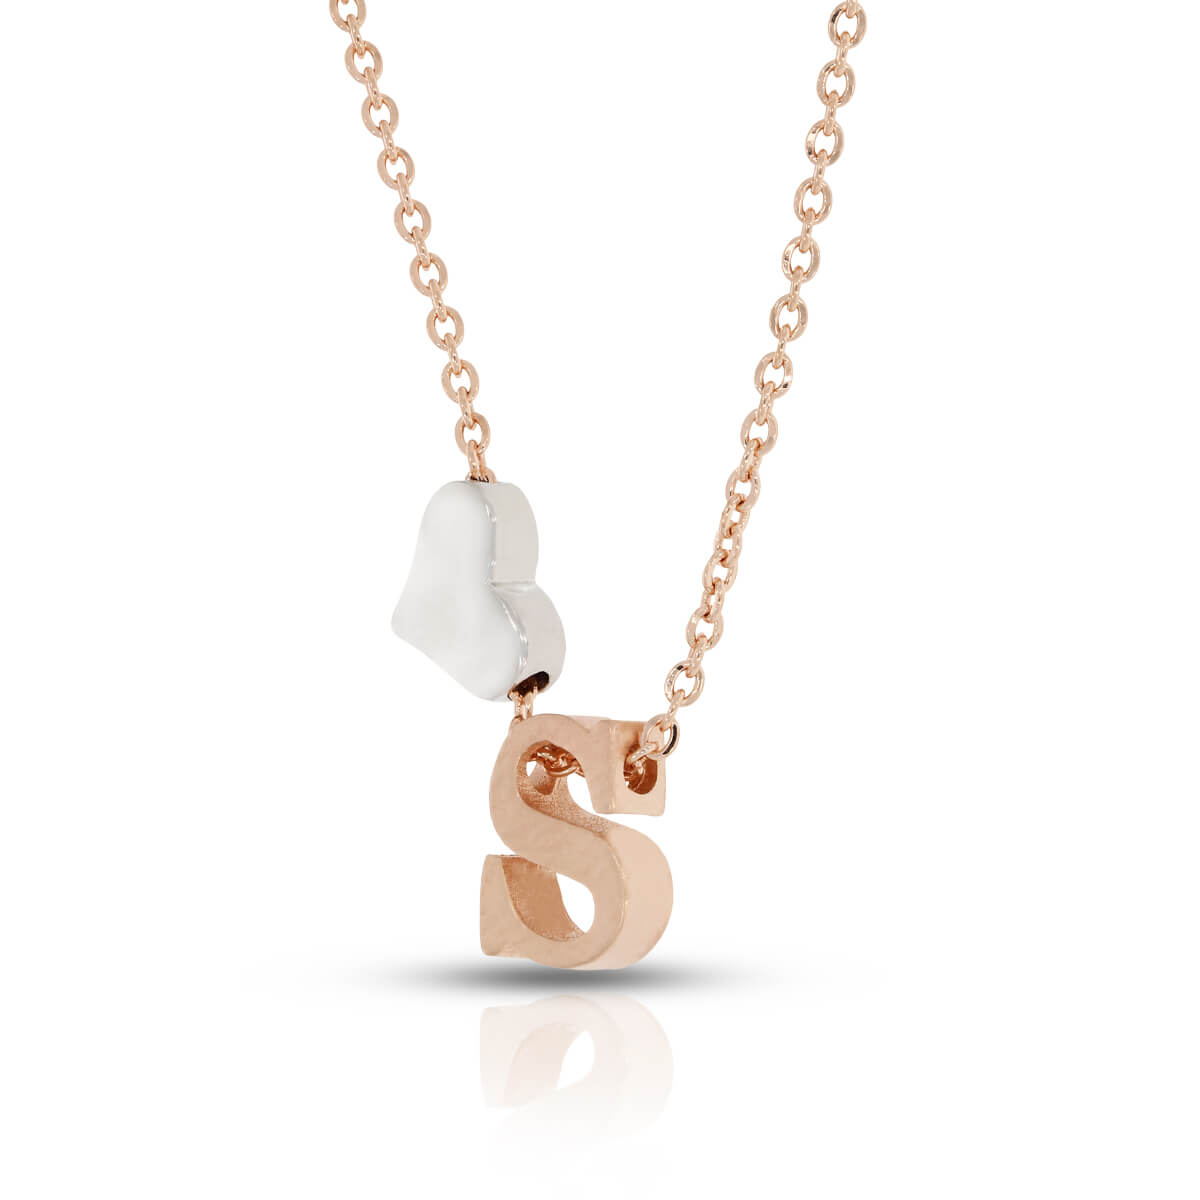 Sterling Silver "S" Initial Necklace